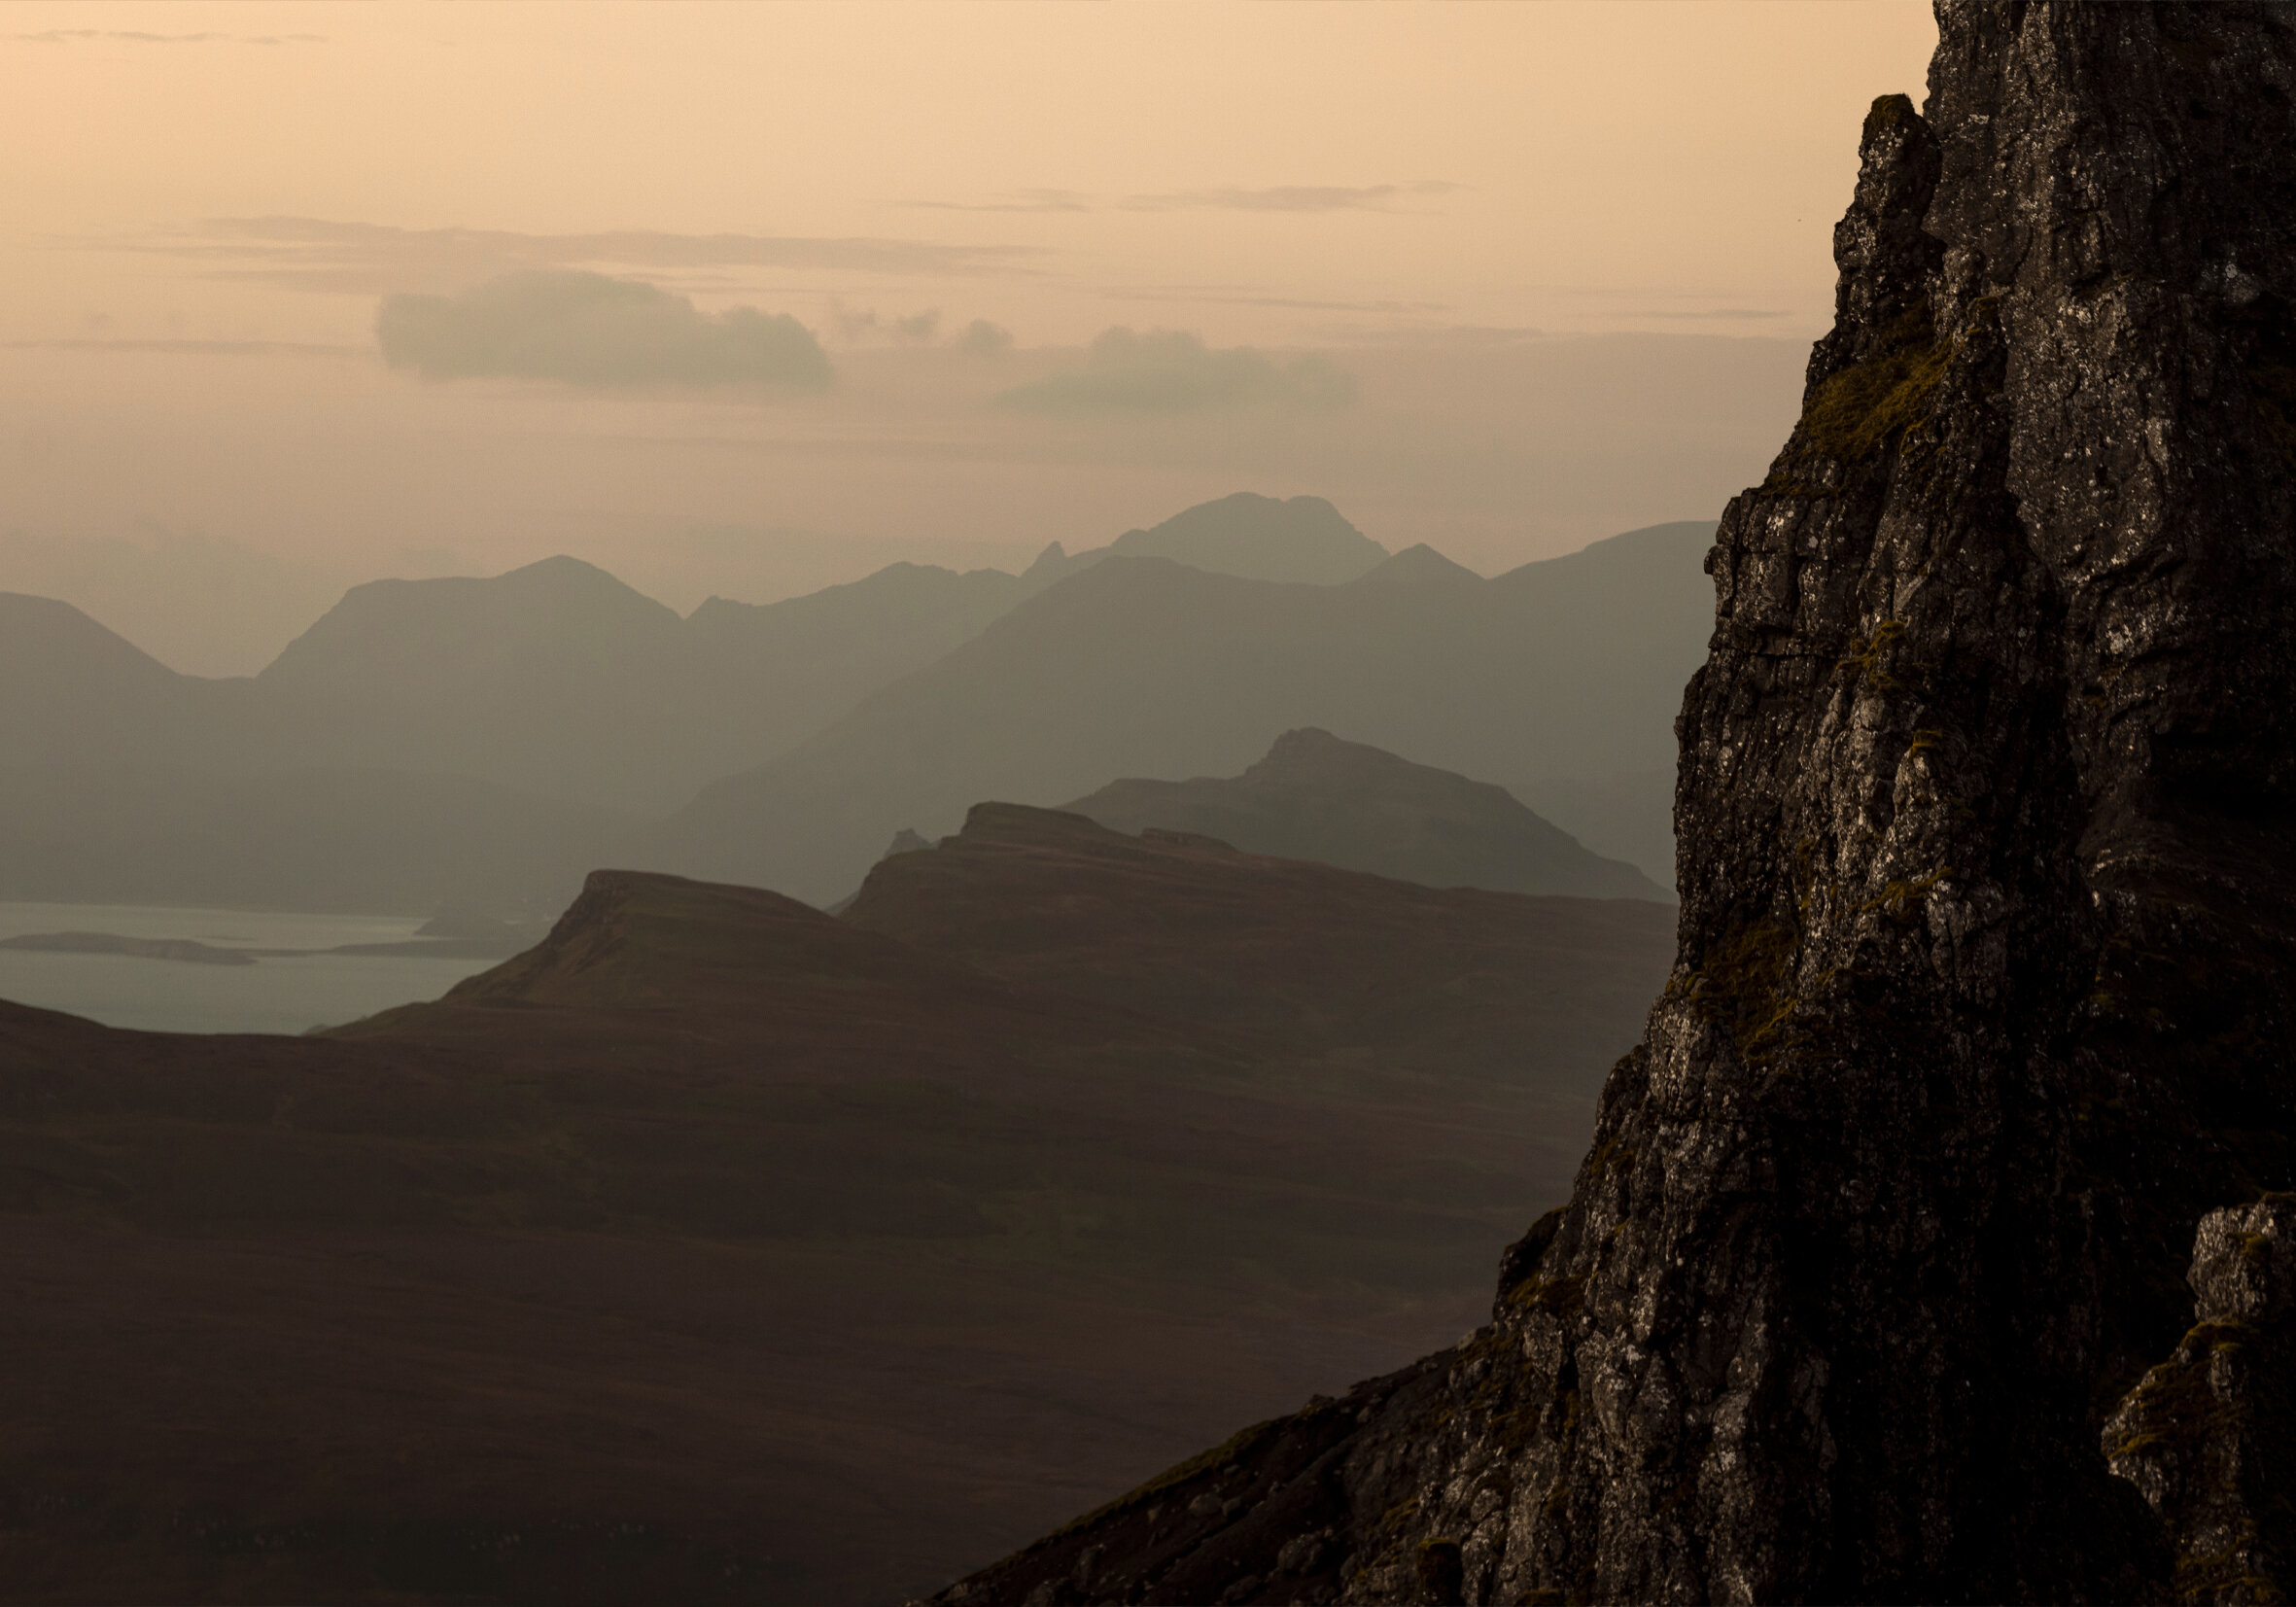 the old man of storr